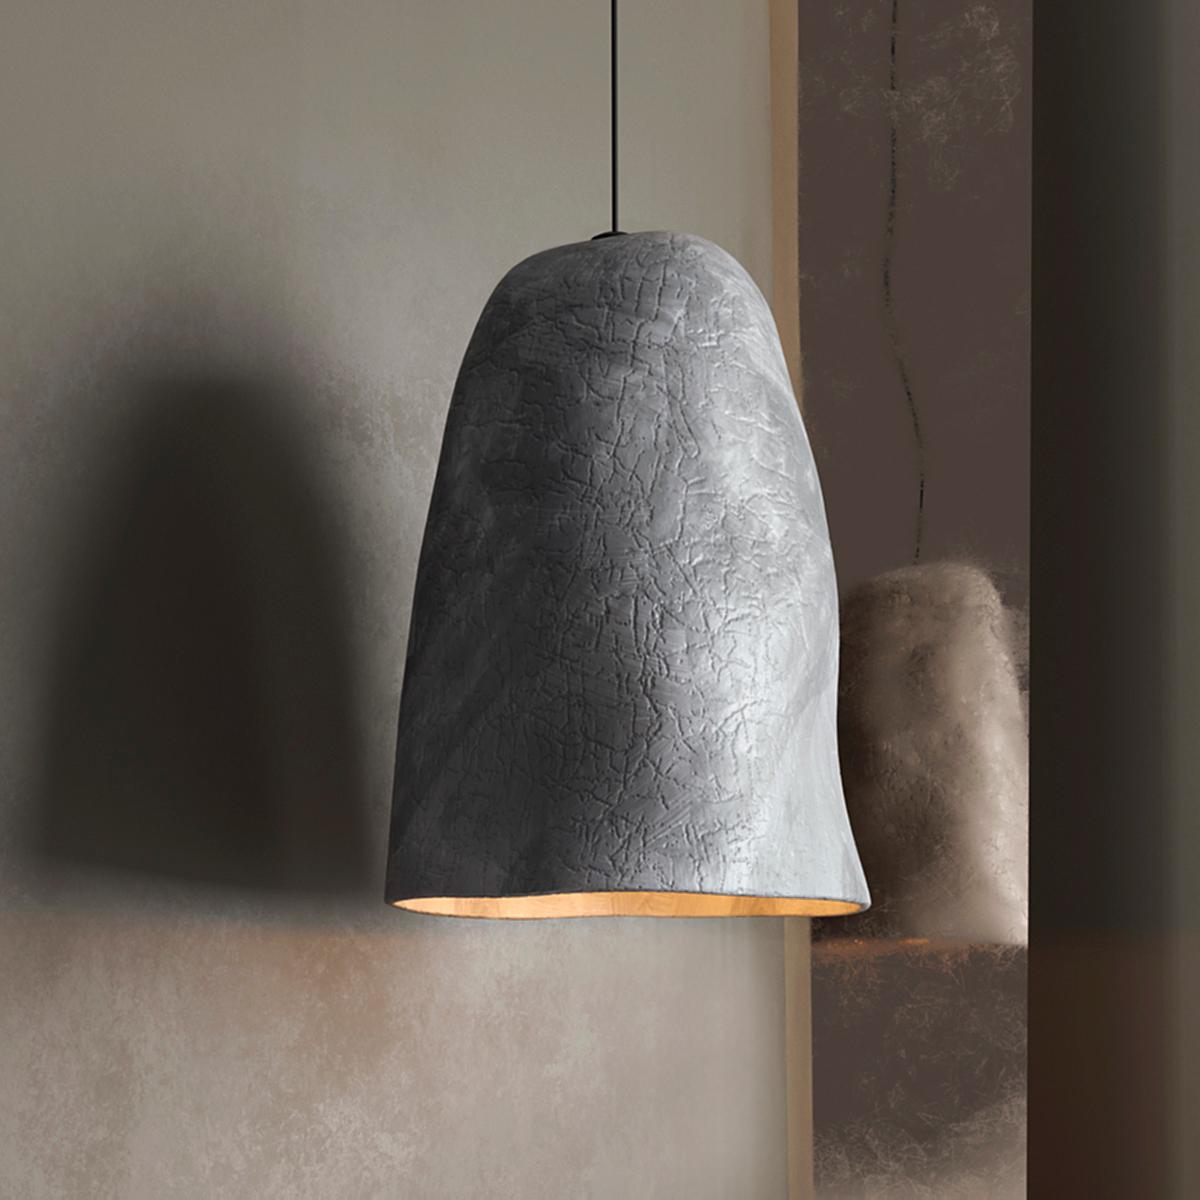 Miata pendant lamp by Makhno
Dimensions: D 35 x W 37 x H 60 cm
Materials: Ceramics

All our lamps can be wired according to each country. If sold to the USA it will be wired for the USA for instance.

Makhno Studio is a workshop of modern